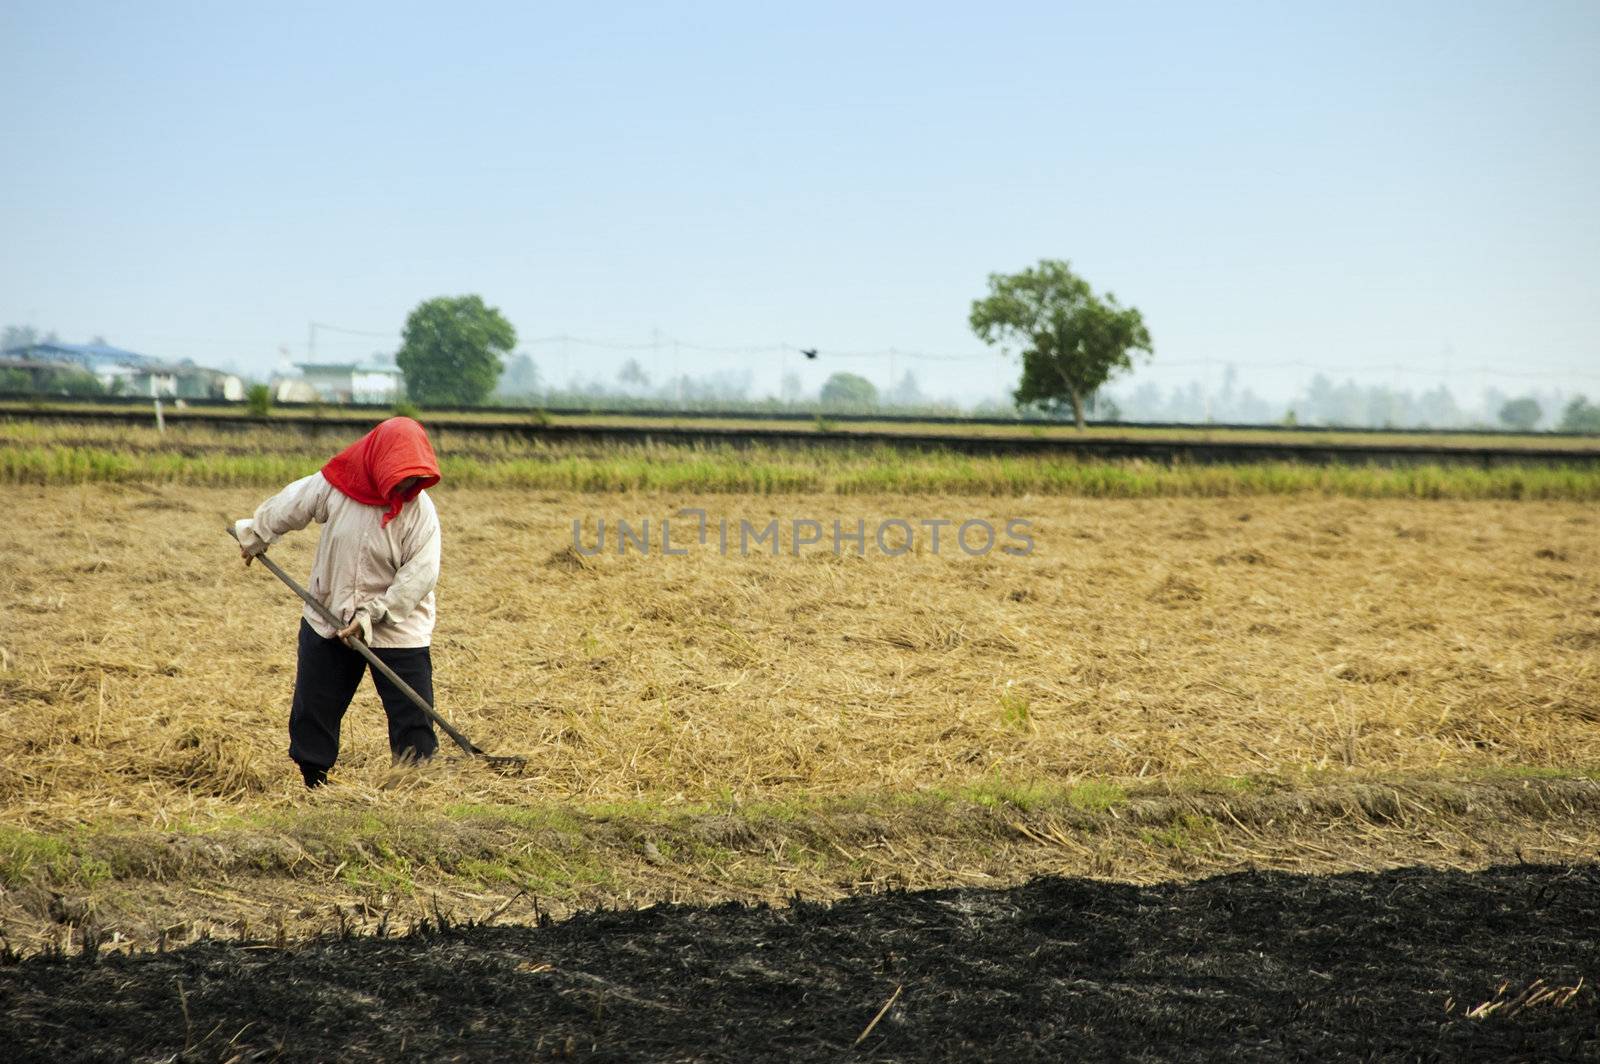 A farmer working on rice filed, after harvesting.